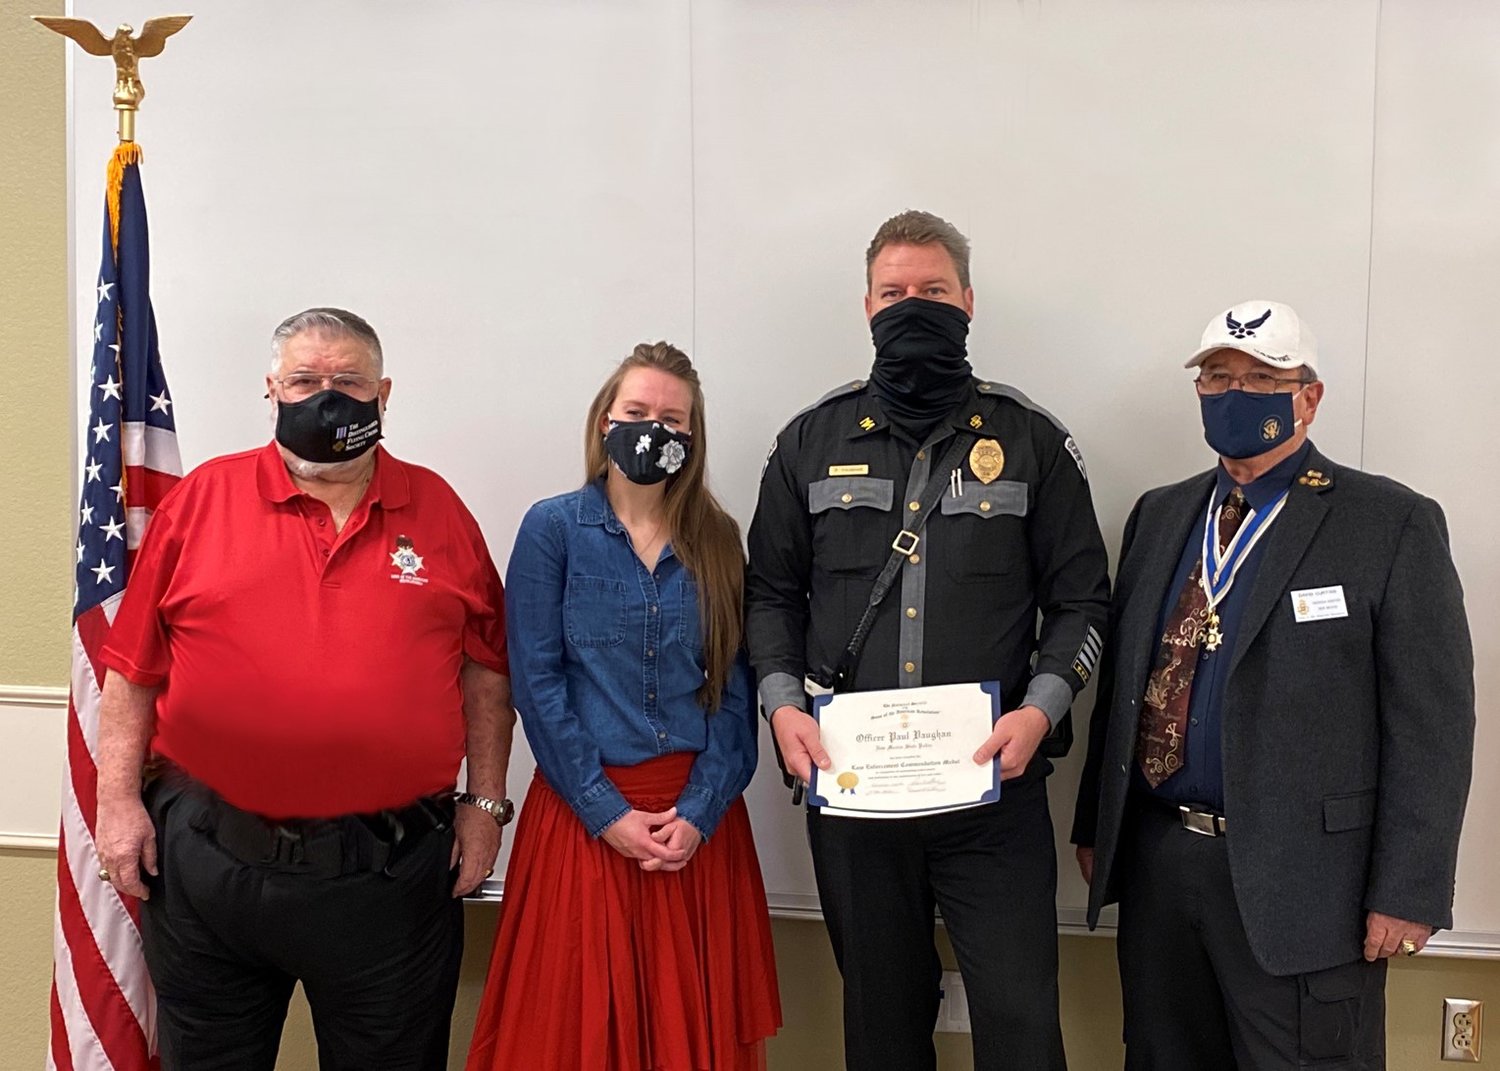 New Mexico State Police Officer Paul Vaughn, second from right, receives a Sons of the American Revolution (SAR) law enforcement commendation medal from SAR Gadsden Chapter President Don Williams, far left, and Past President Dave Curtiss. Also shown is Vaughn’s wife, Amy.